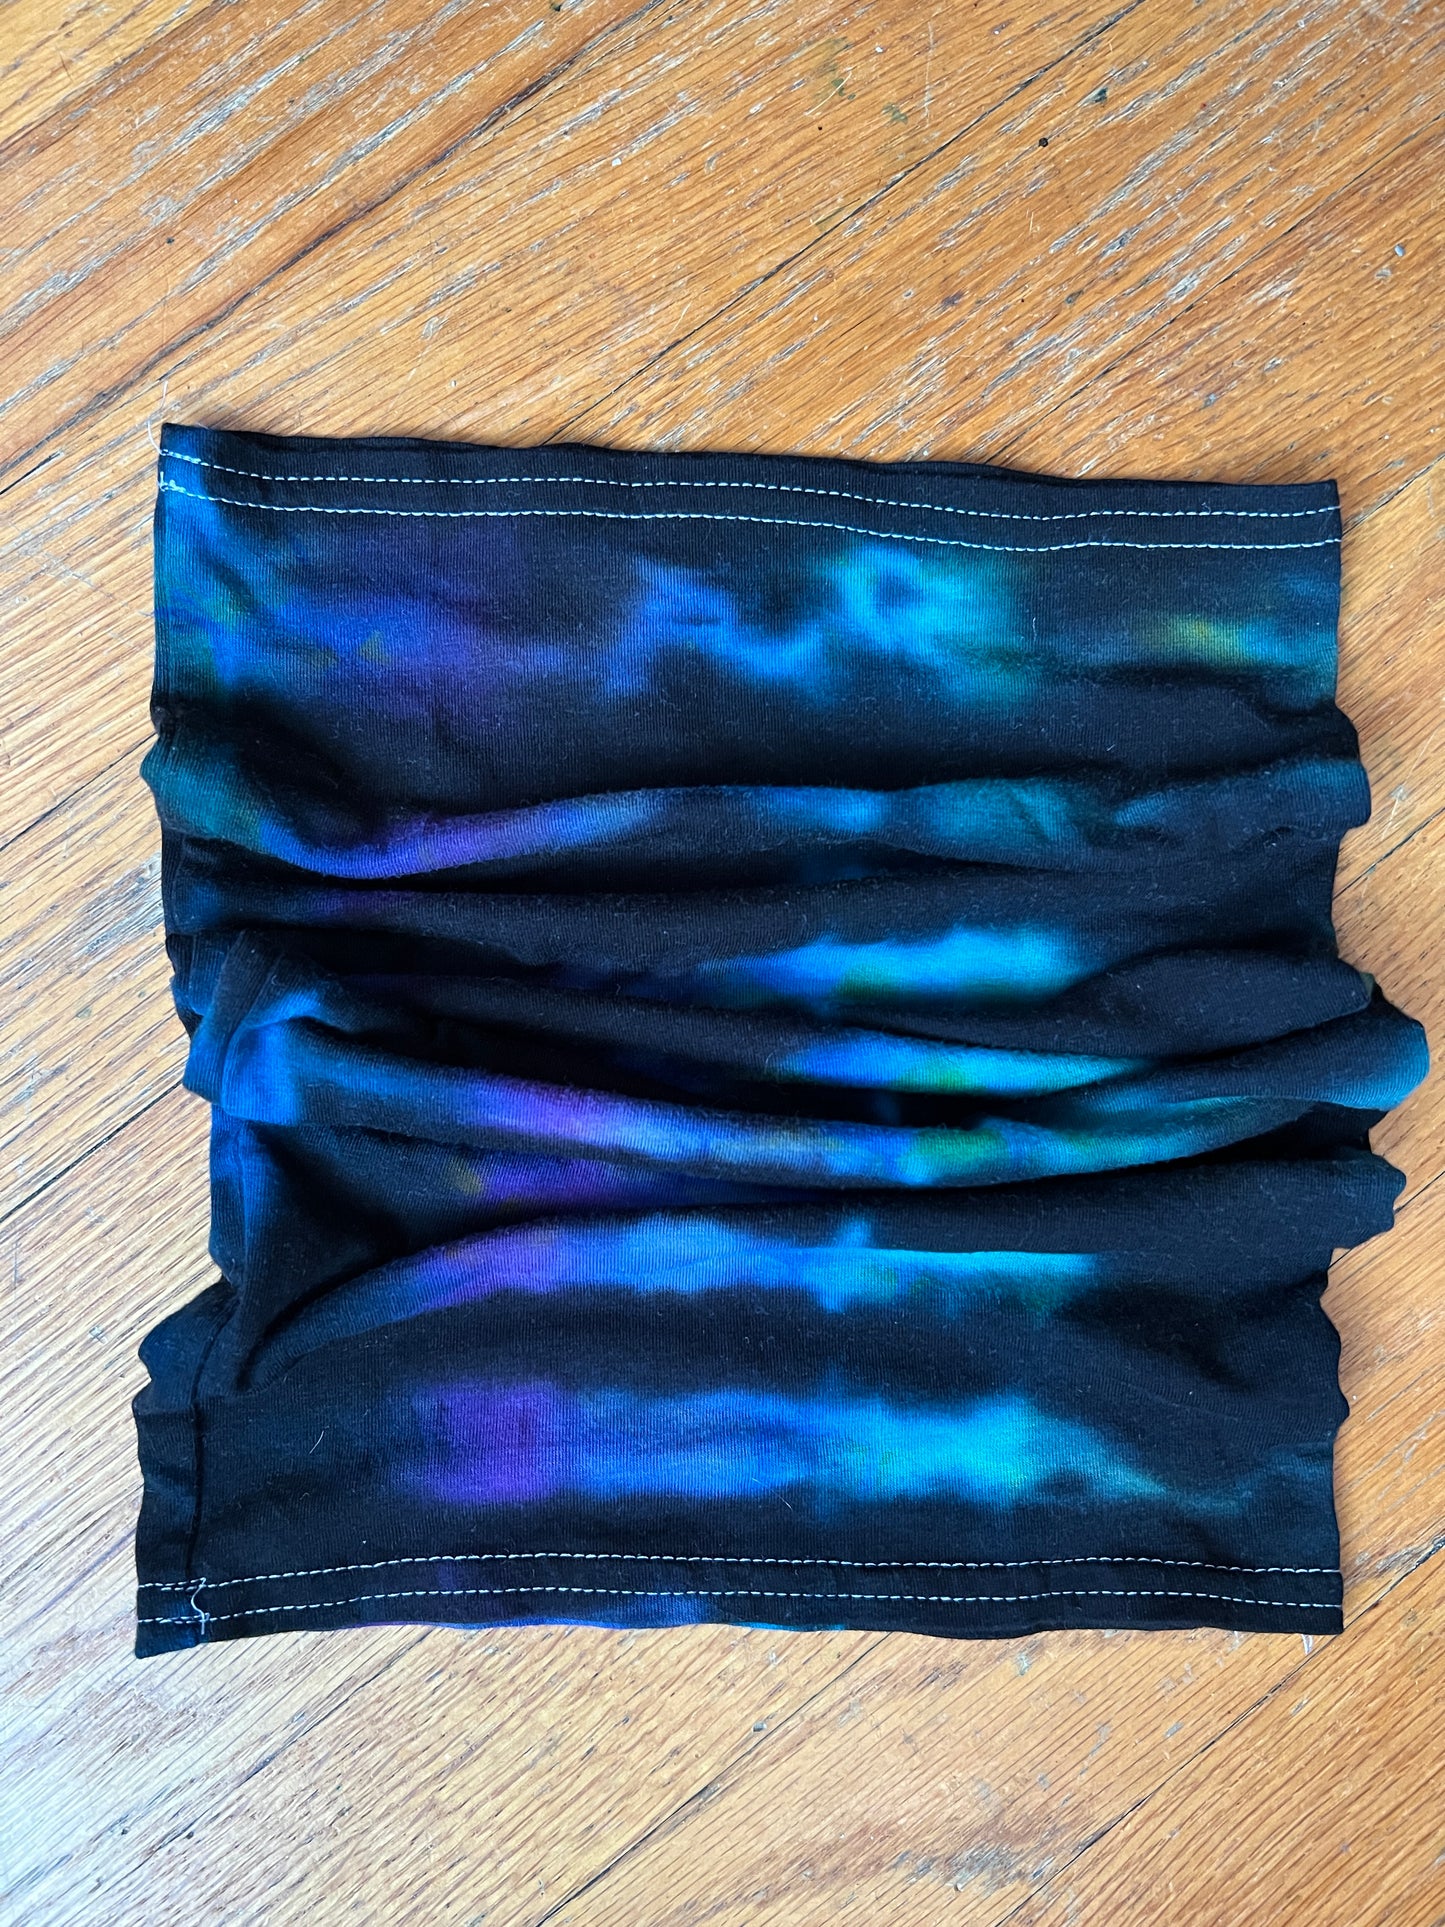 Balaclava Gaiter Tie Dye Purple and Turquoise with Black